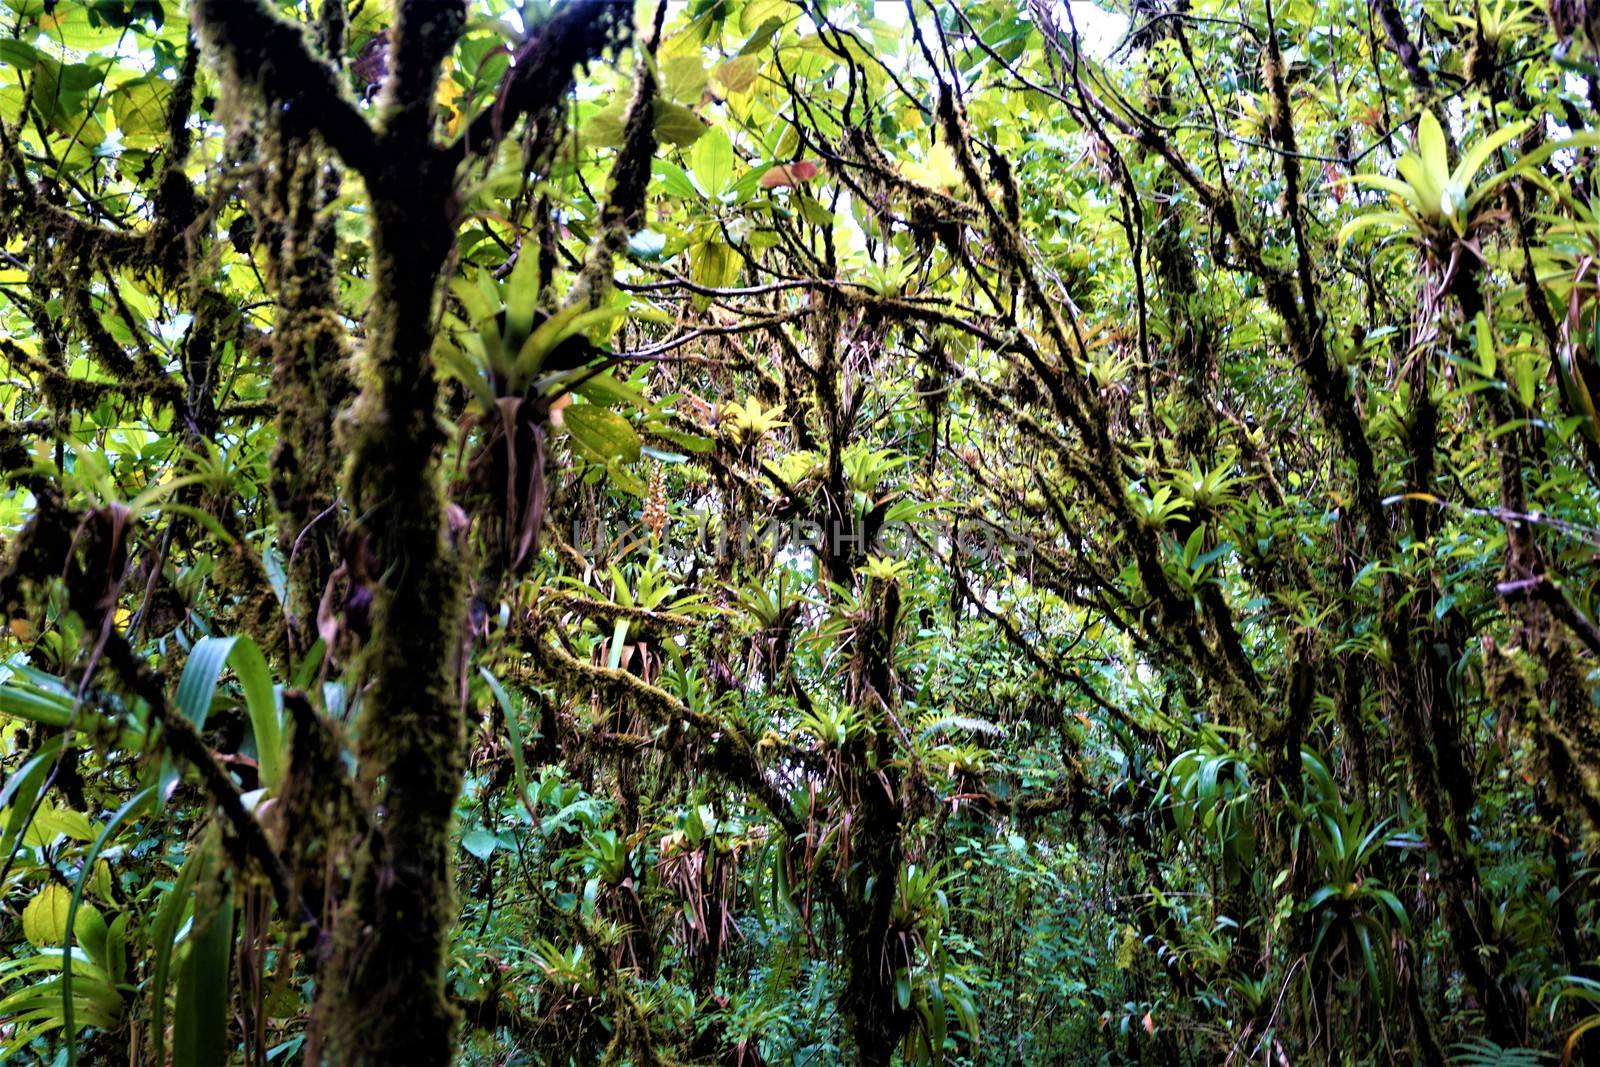 Bromelias and moss growing on trees in Juan Castro Blanco National Park, Costa Rica